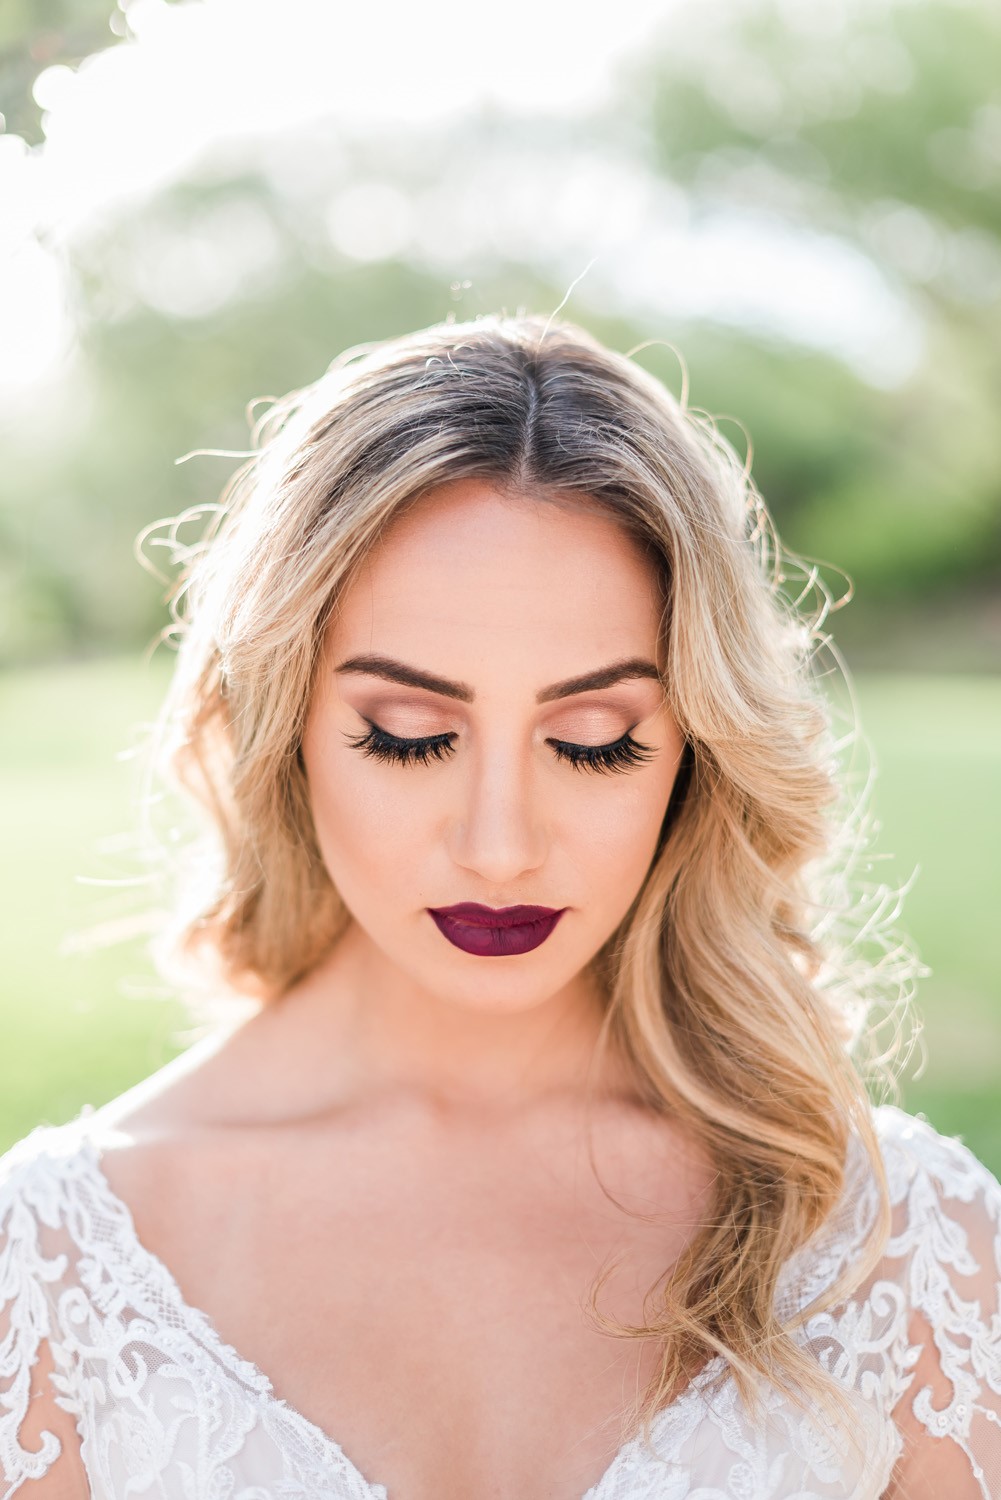 Outdoor Wedding & Makeup: Pro Tips For Brides | Makeup the 702